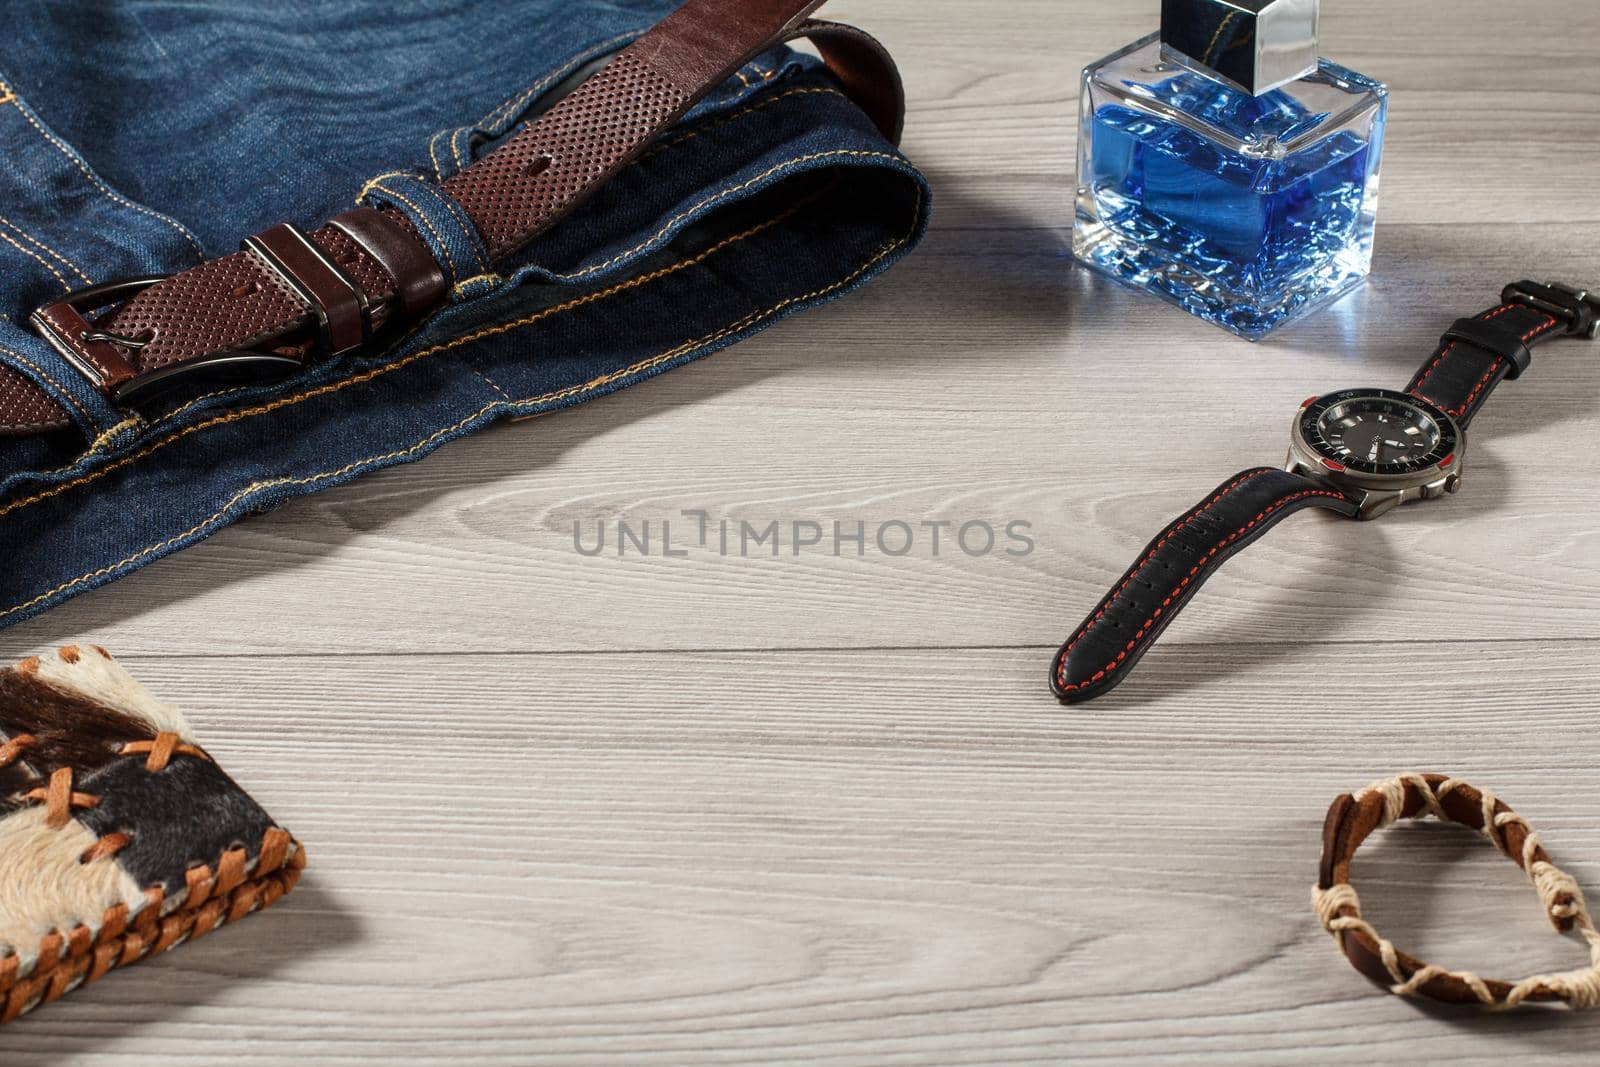 Man perfume, watch with a leather strap, jeans with leather belt, amulet and leather purse on a gray wooden background